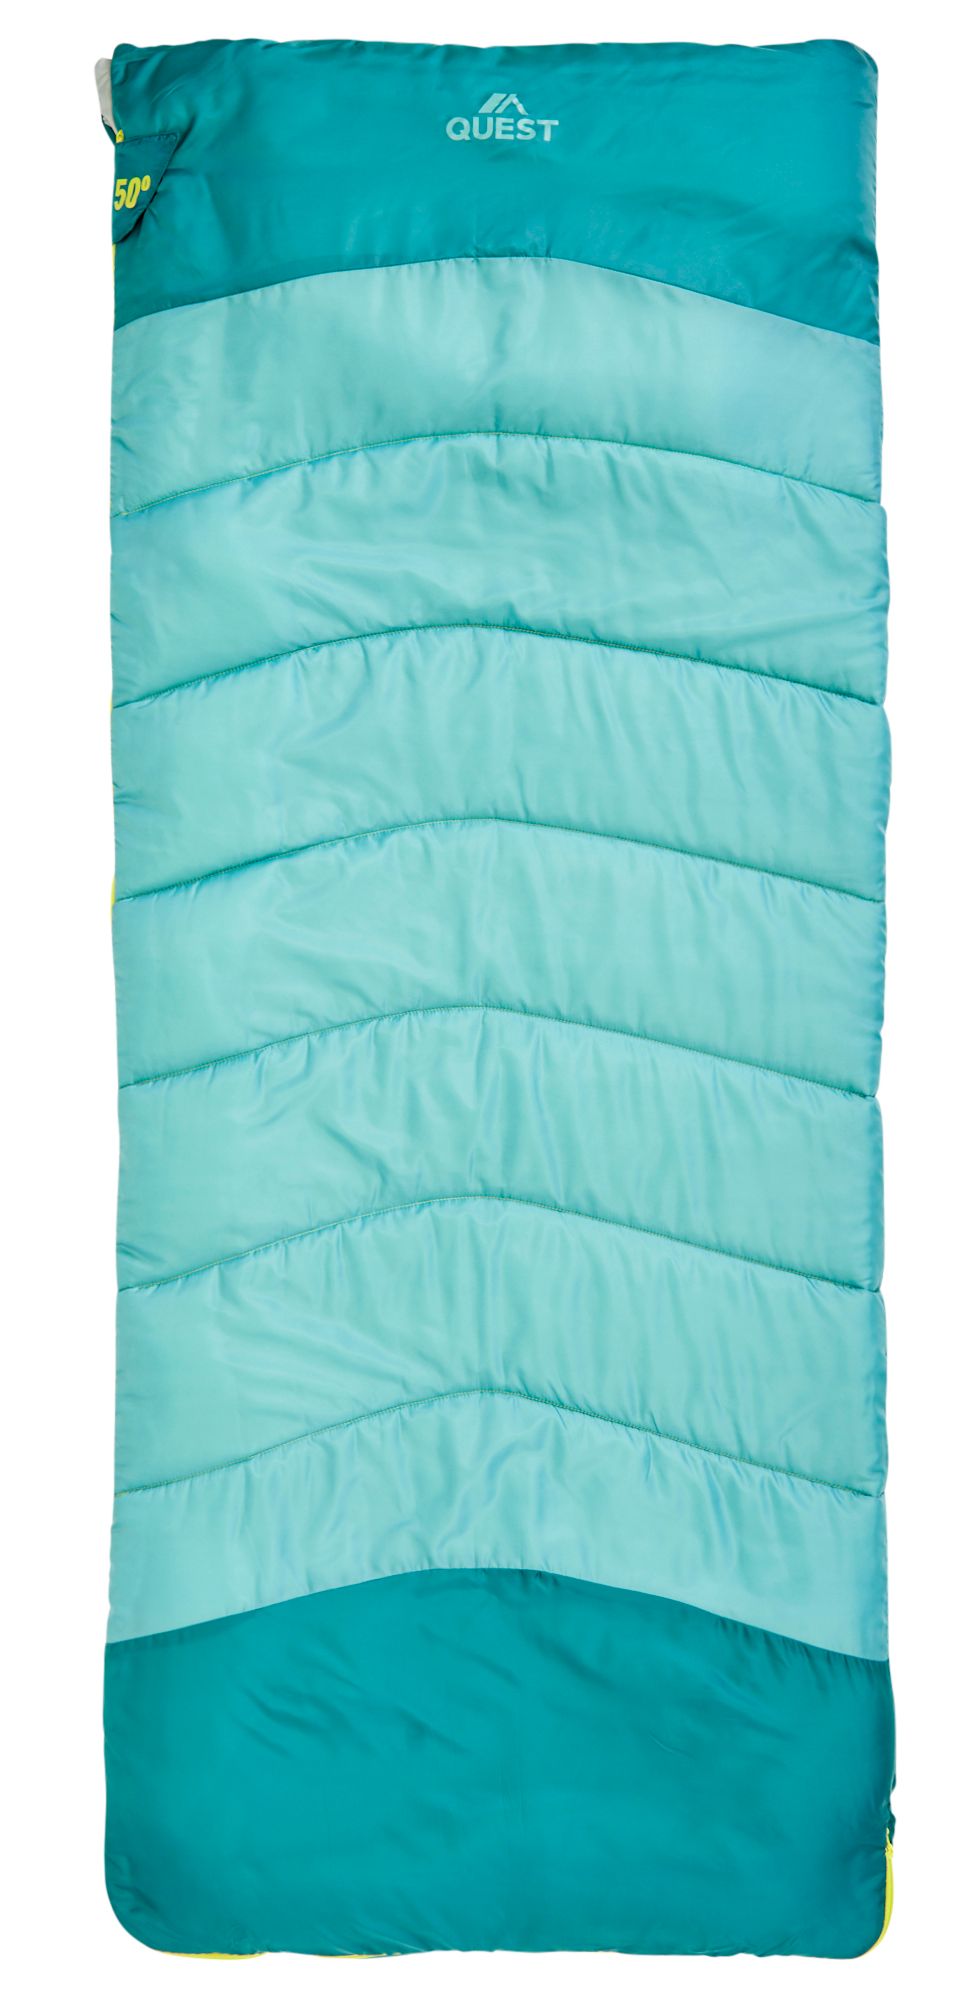 Photos - Suitcase / Backpack Cover Quest Timber Adult Rec Sleeping Bag, Men's, Teal | Father's Day Gift Idea 